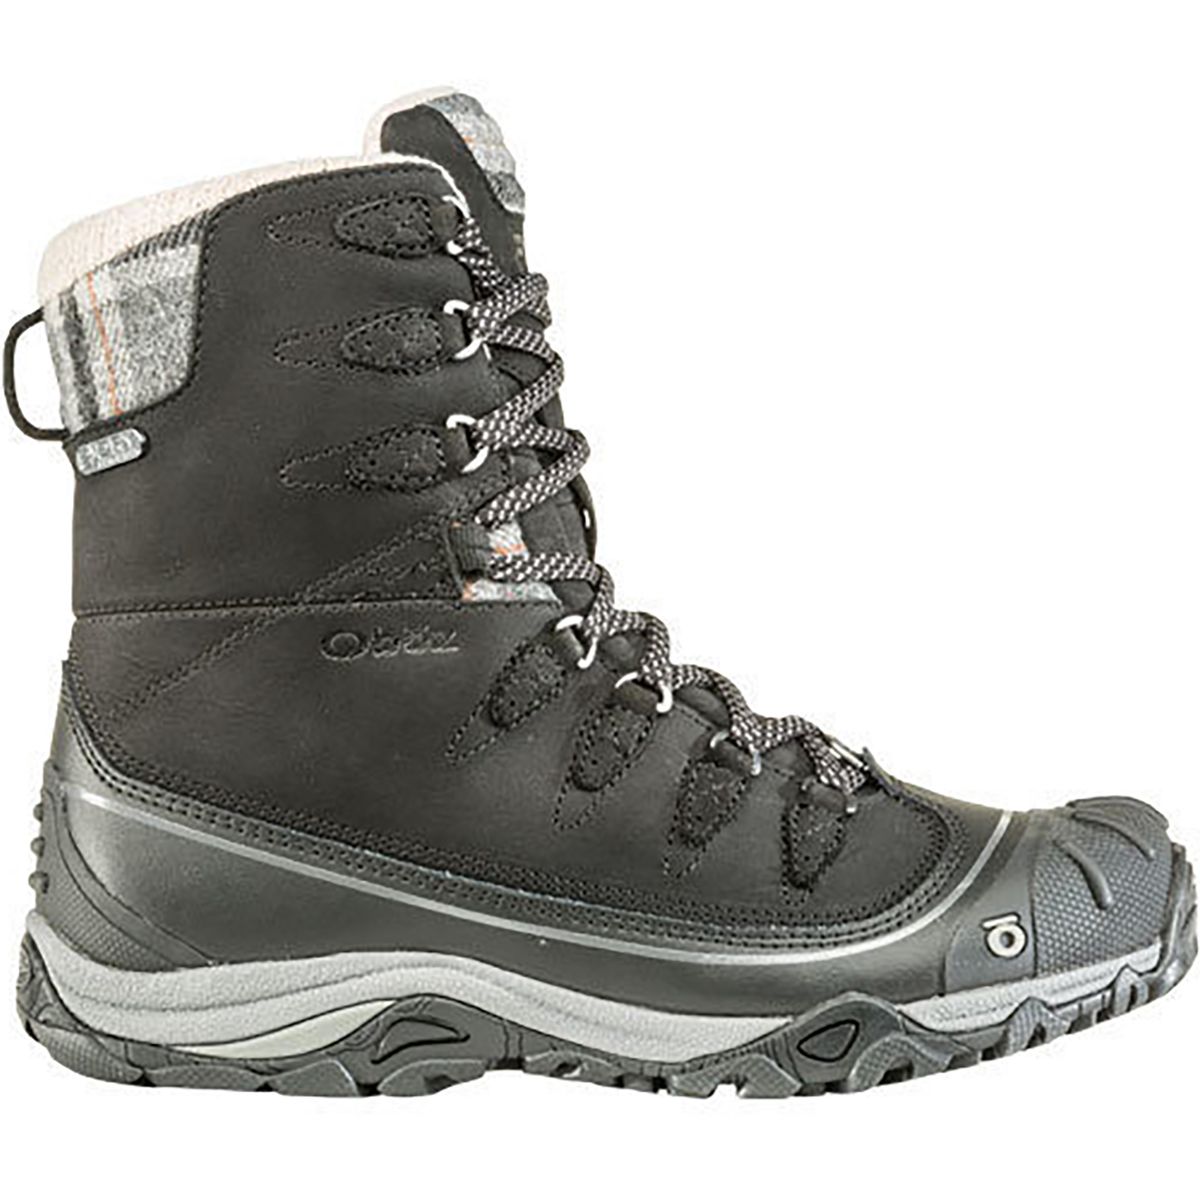 Oboz Sapphire 8in Insulated B-Dry Boot - Women's